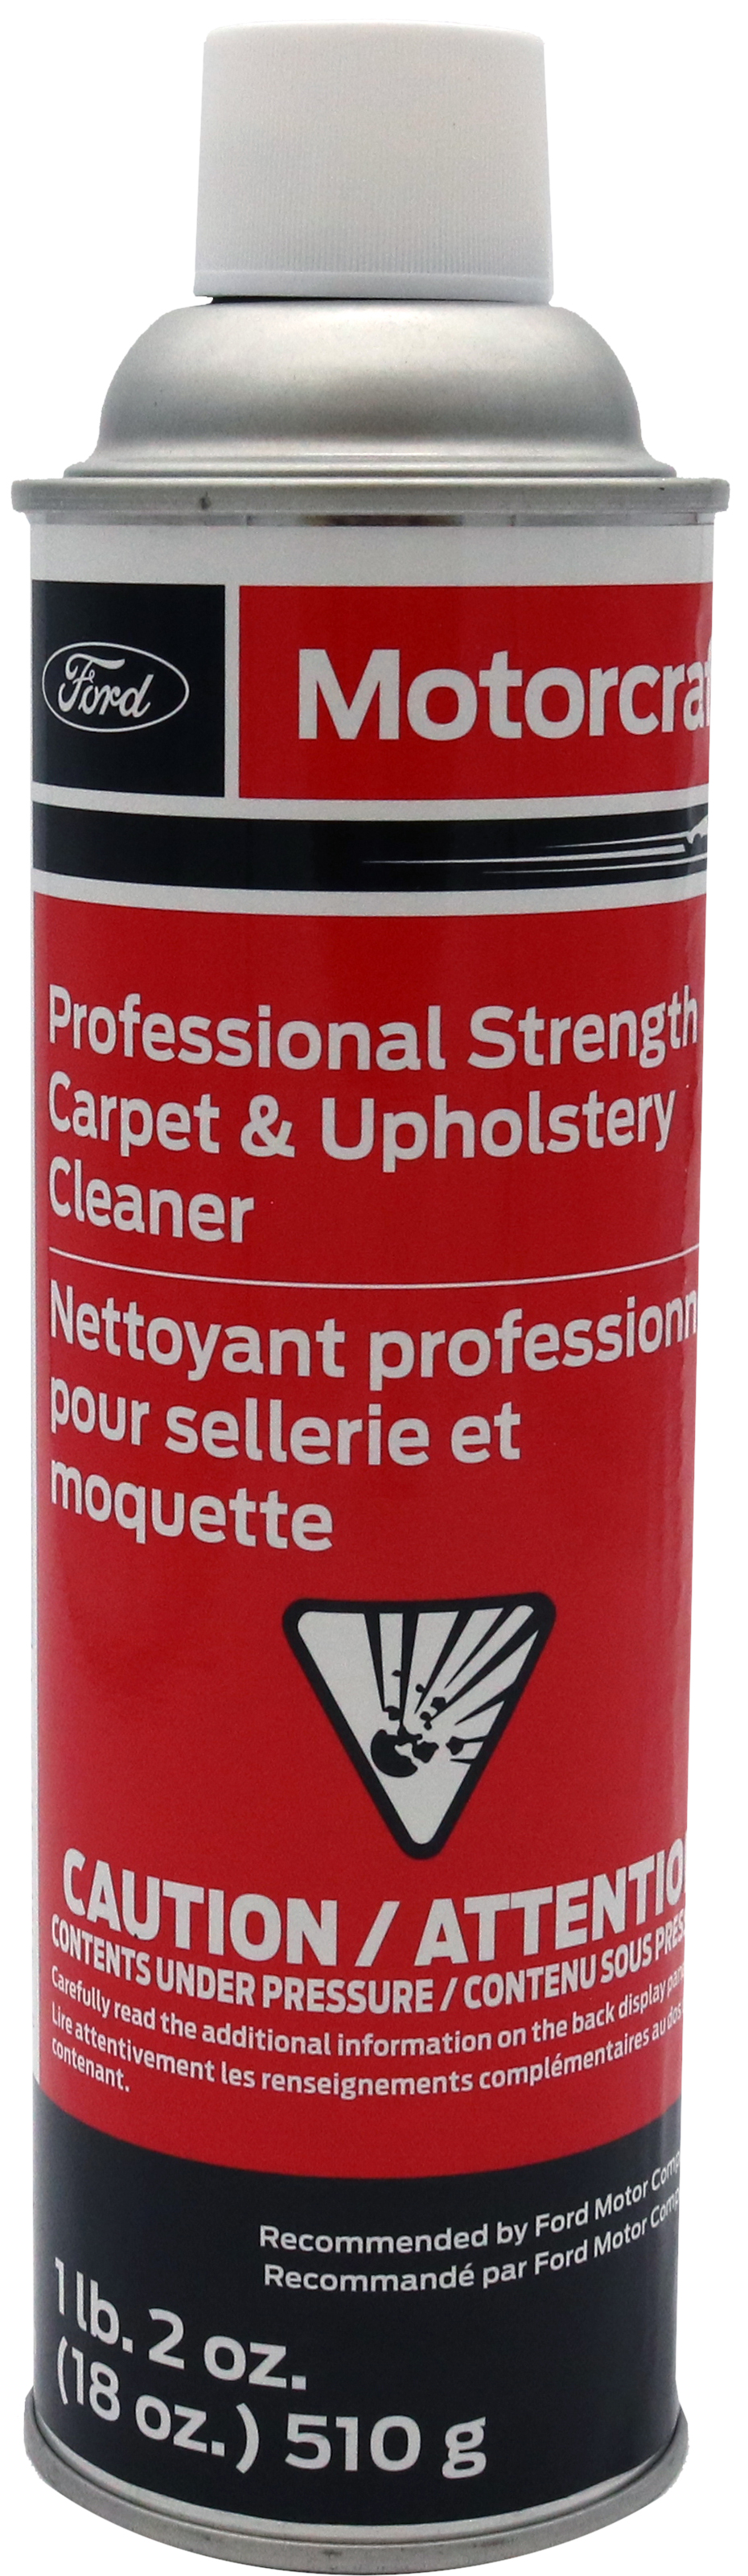 Professional Strength Carpet and Upholstery Cleaner